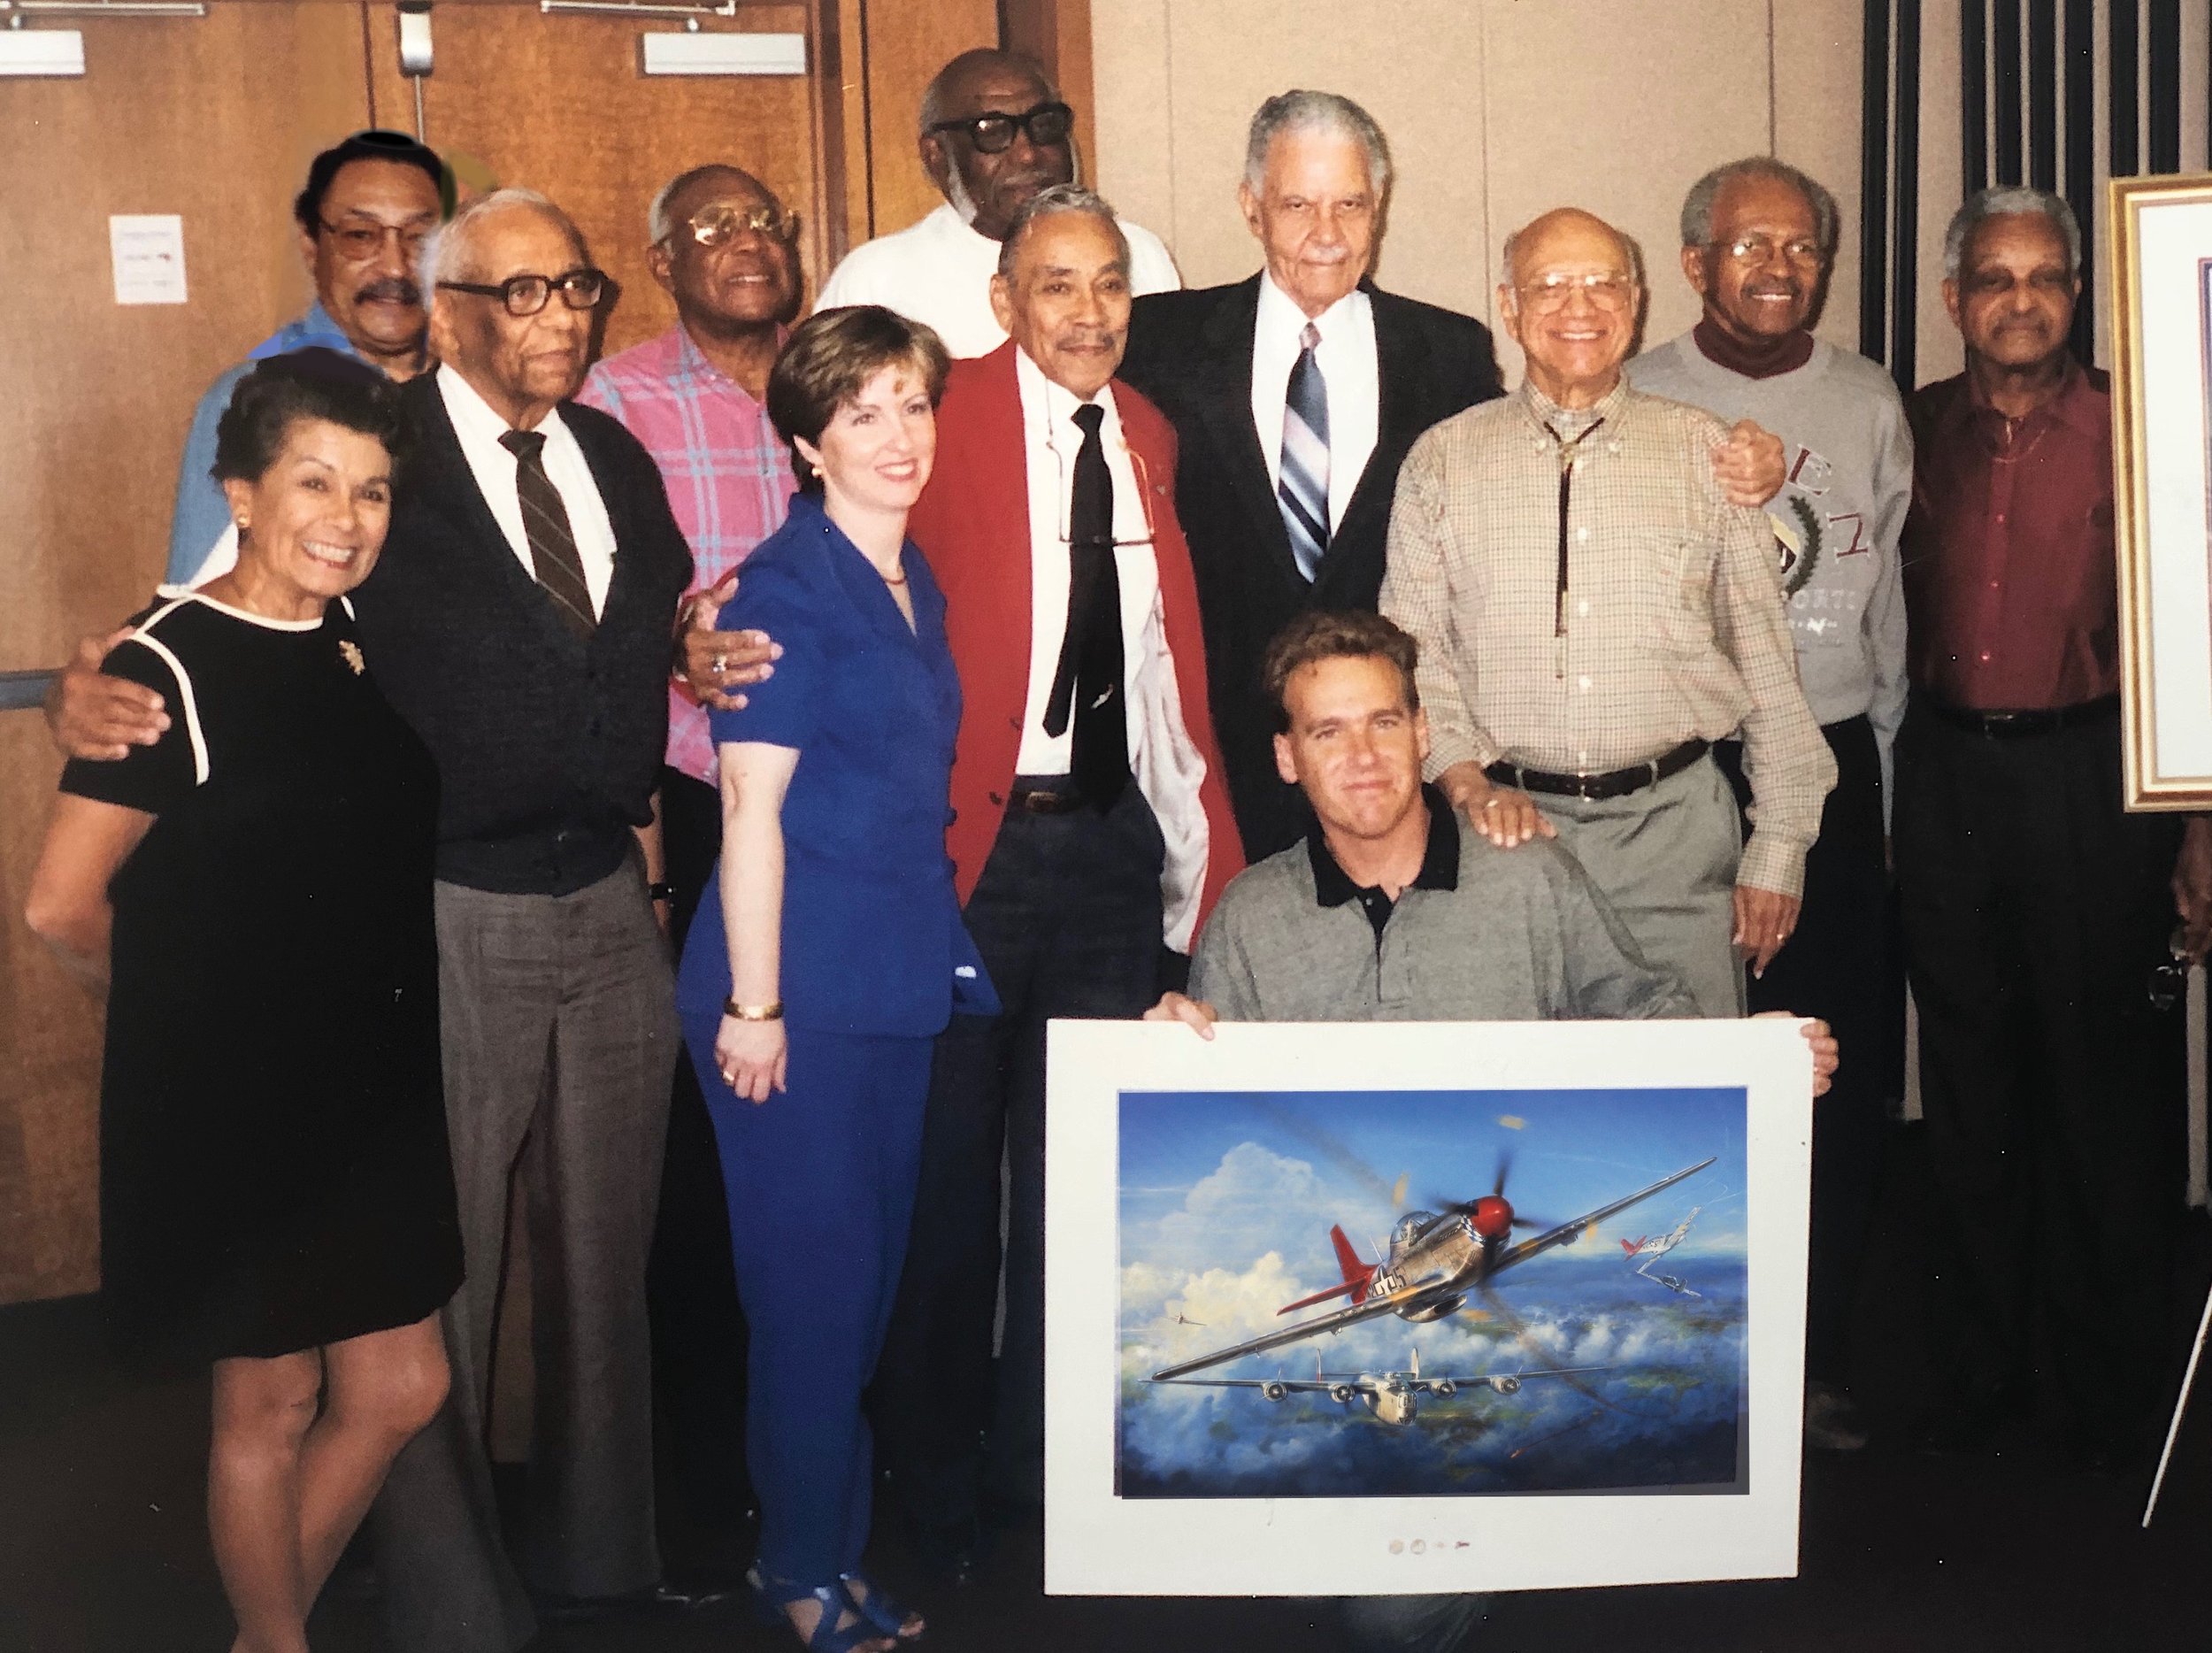  It was indeed a great honor to have the participation of numerous veterans of the Tuskegee Airmen in signing prints of Red Tail Angels.&nbsp;  My friend Col. Paul Ortiz had arranged a couple print signing sessions on the East Coast, the first of whi